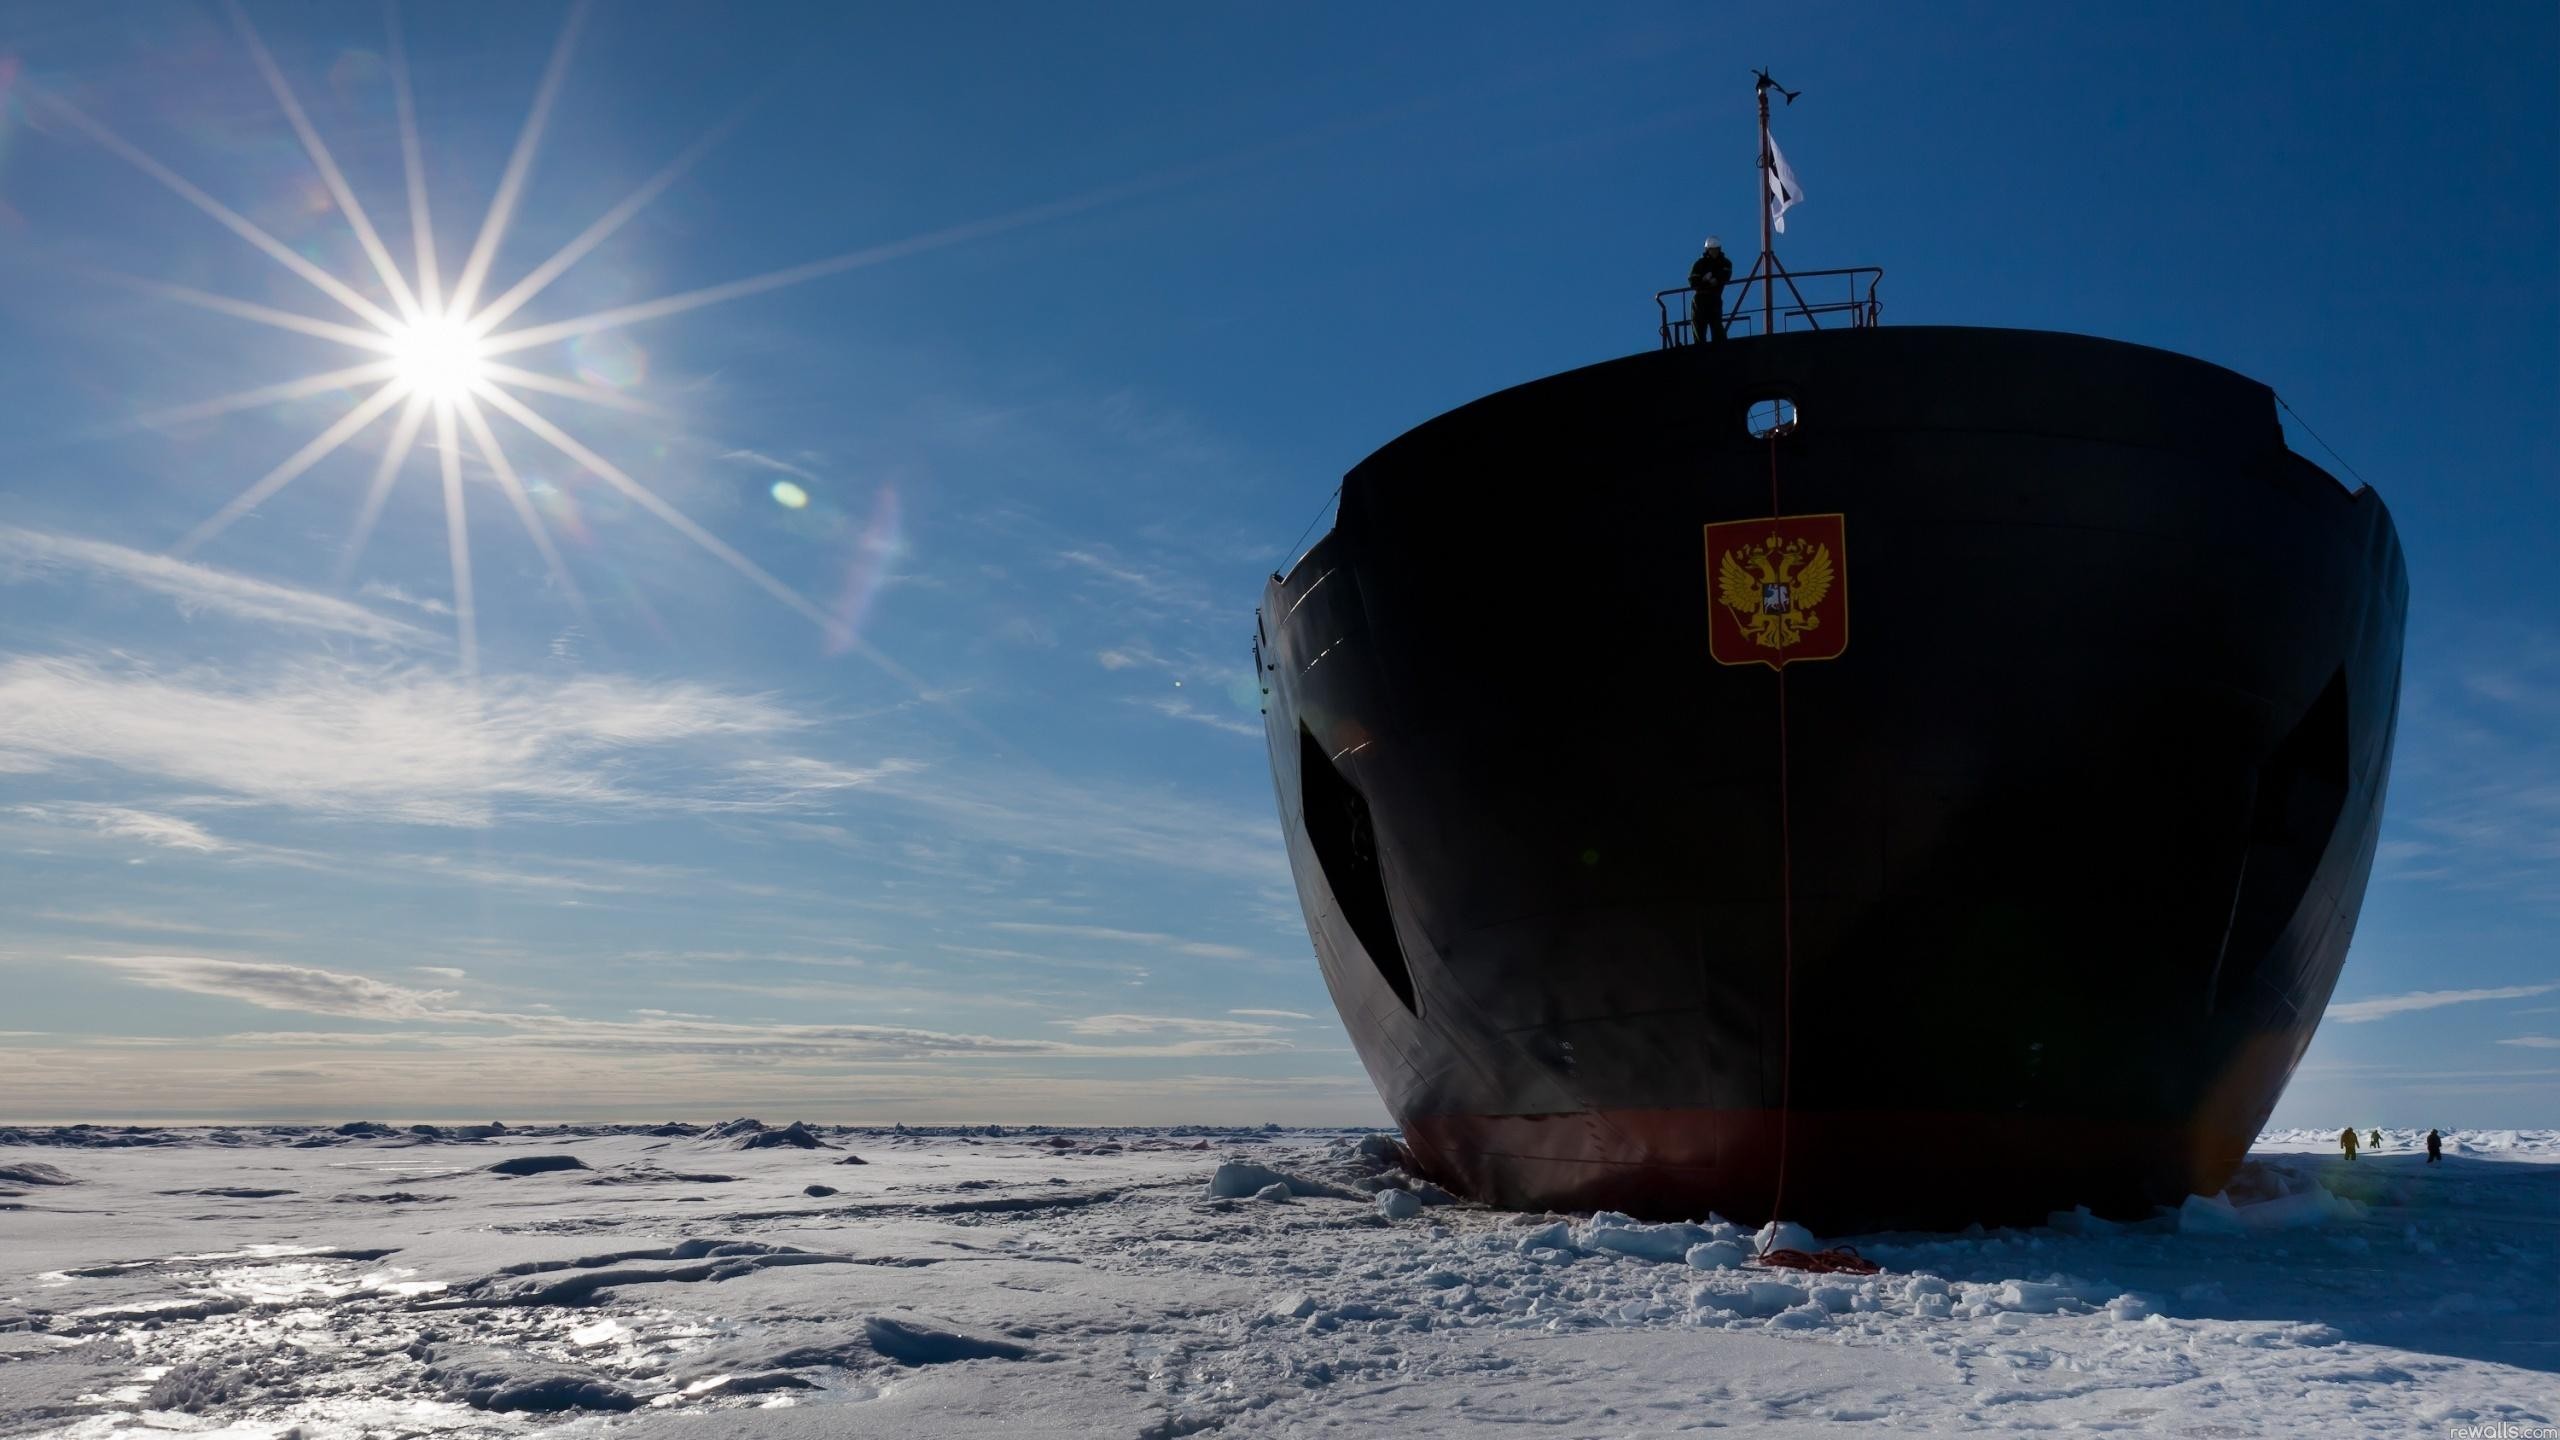 Ship Cargo Shadow Winter Ice Snow Russian Sun Clouds Icebreakers Men Ropes Flag Coat Of Arms Sunligh 2560x1440